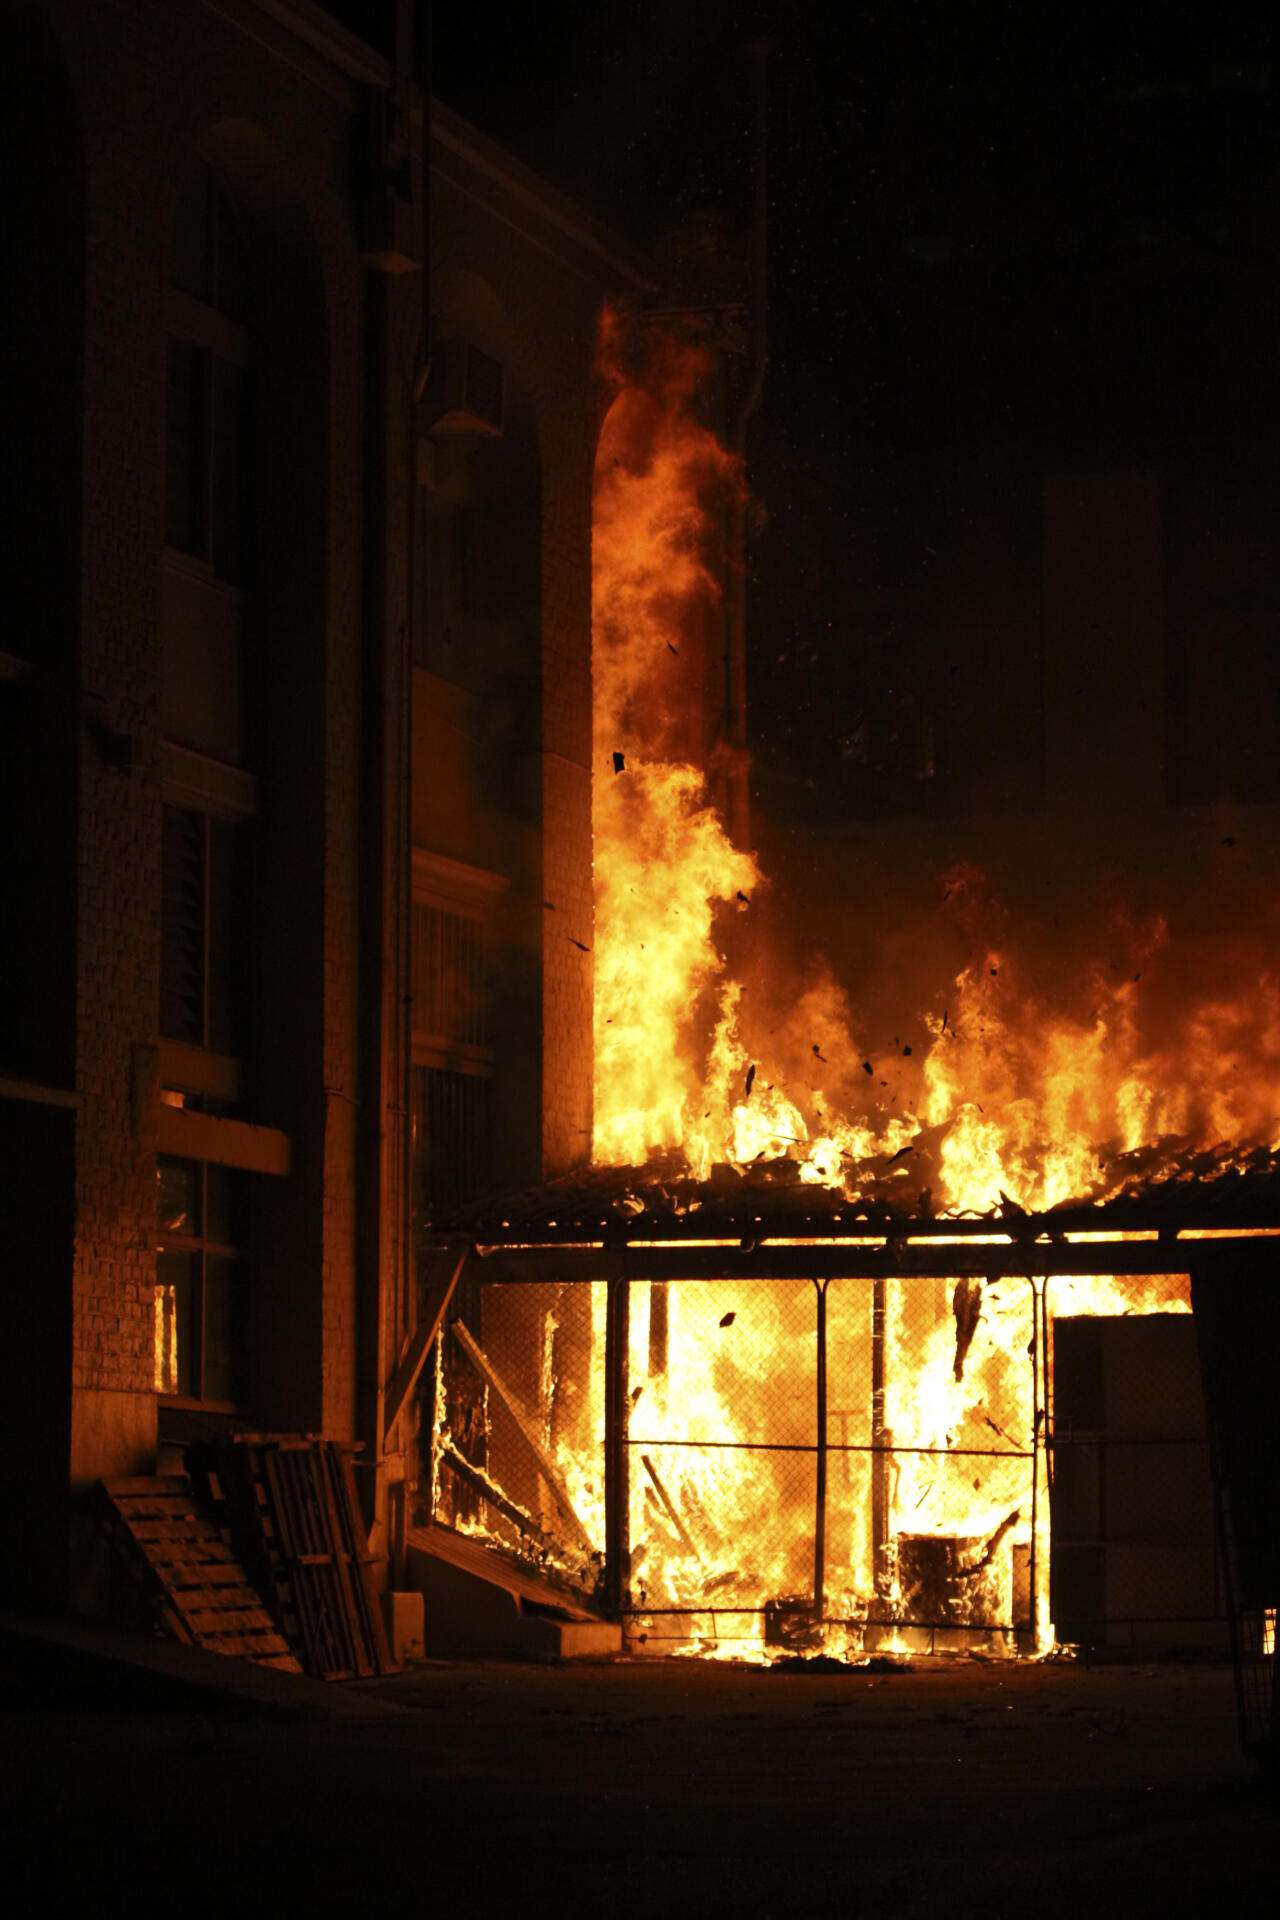 A shed and building burning at night.